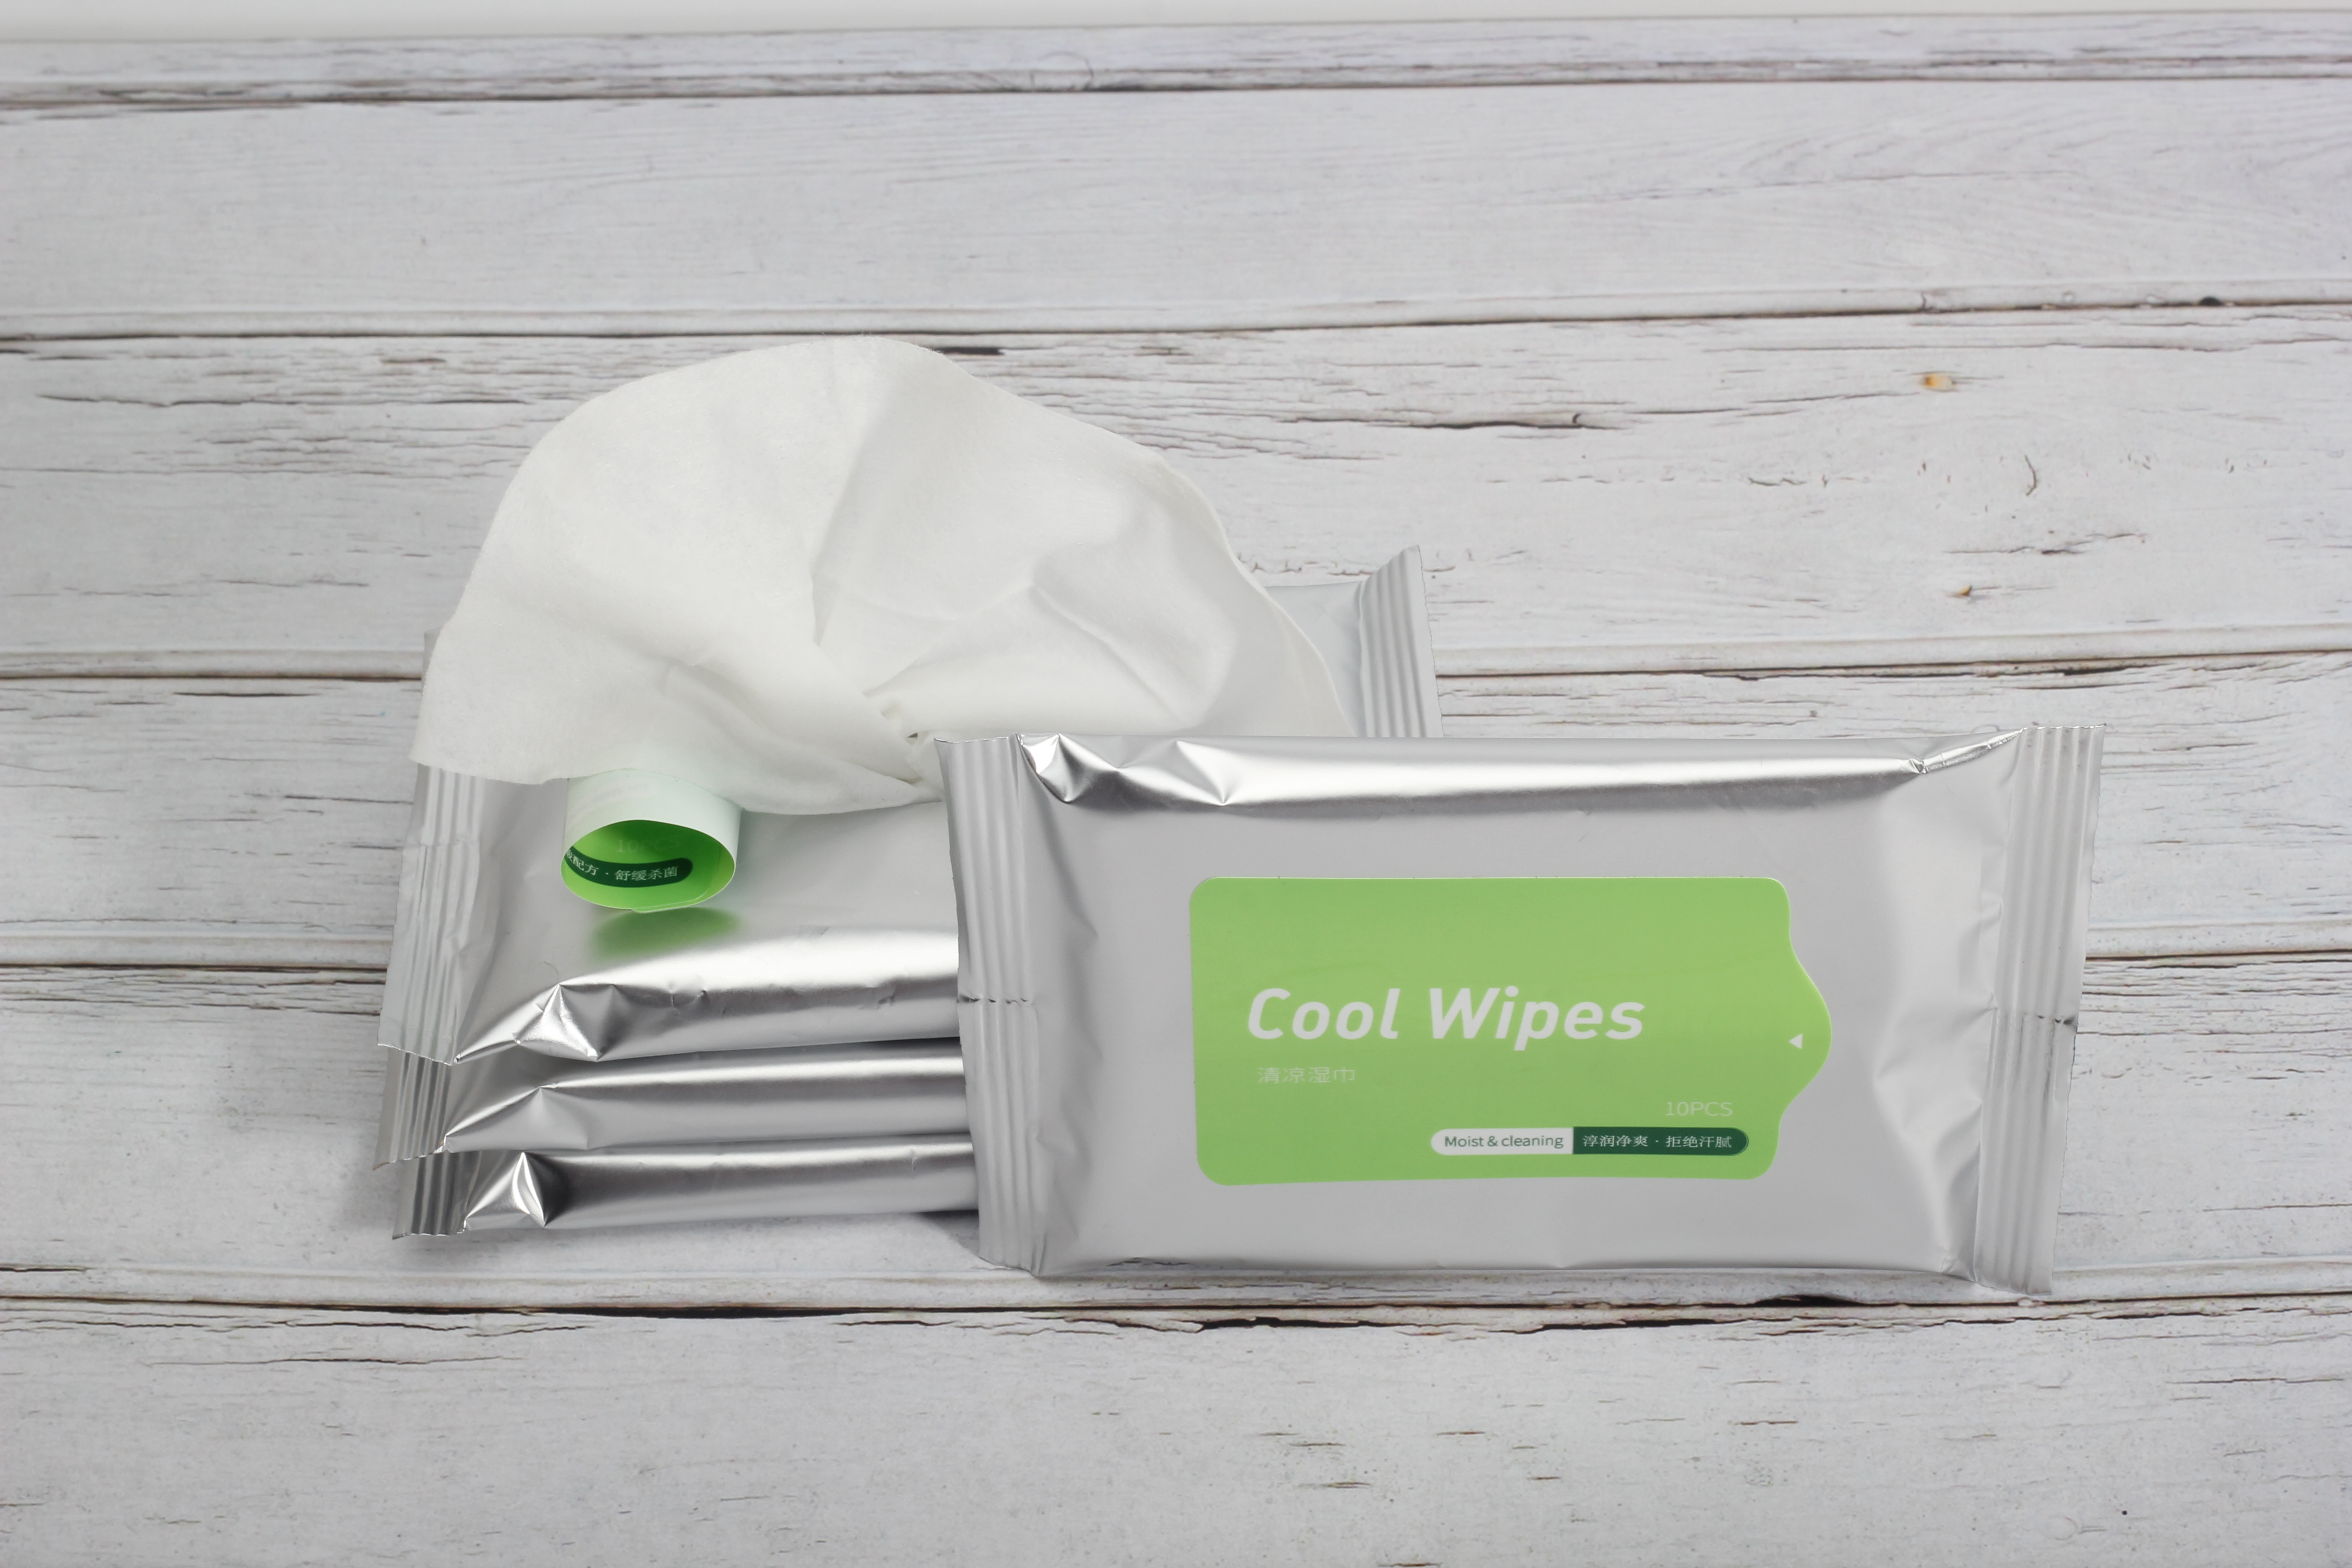 Cool Wet Wipes Face Cleaning Refresh Wipes Natural Spunlace Nonwoven Fabric Wipes